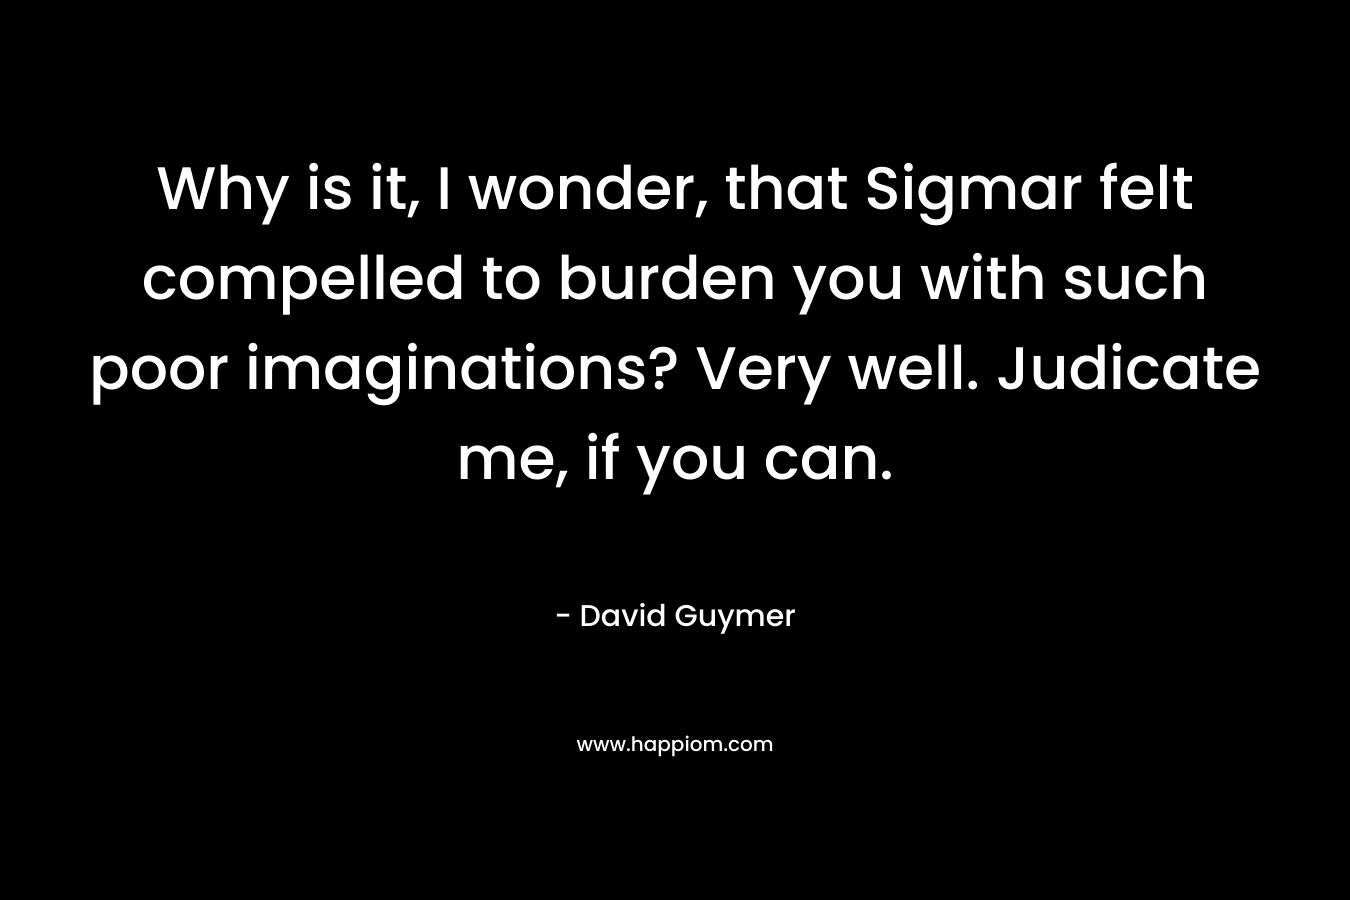 Why is it, I wonder, that Sigmar felt compelled to burden you with such poor imaginations? Very well. Judicate me, if you can. – David Guymer